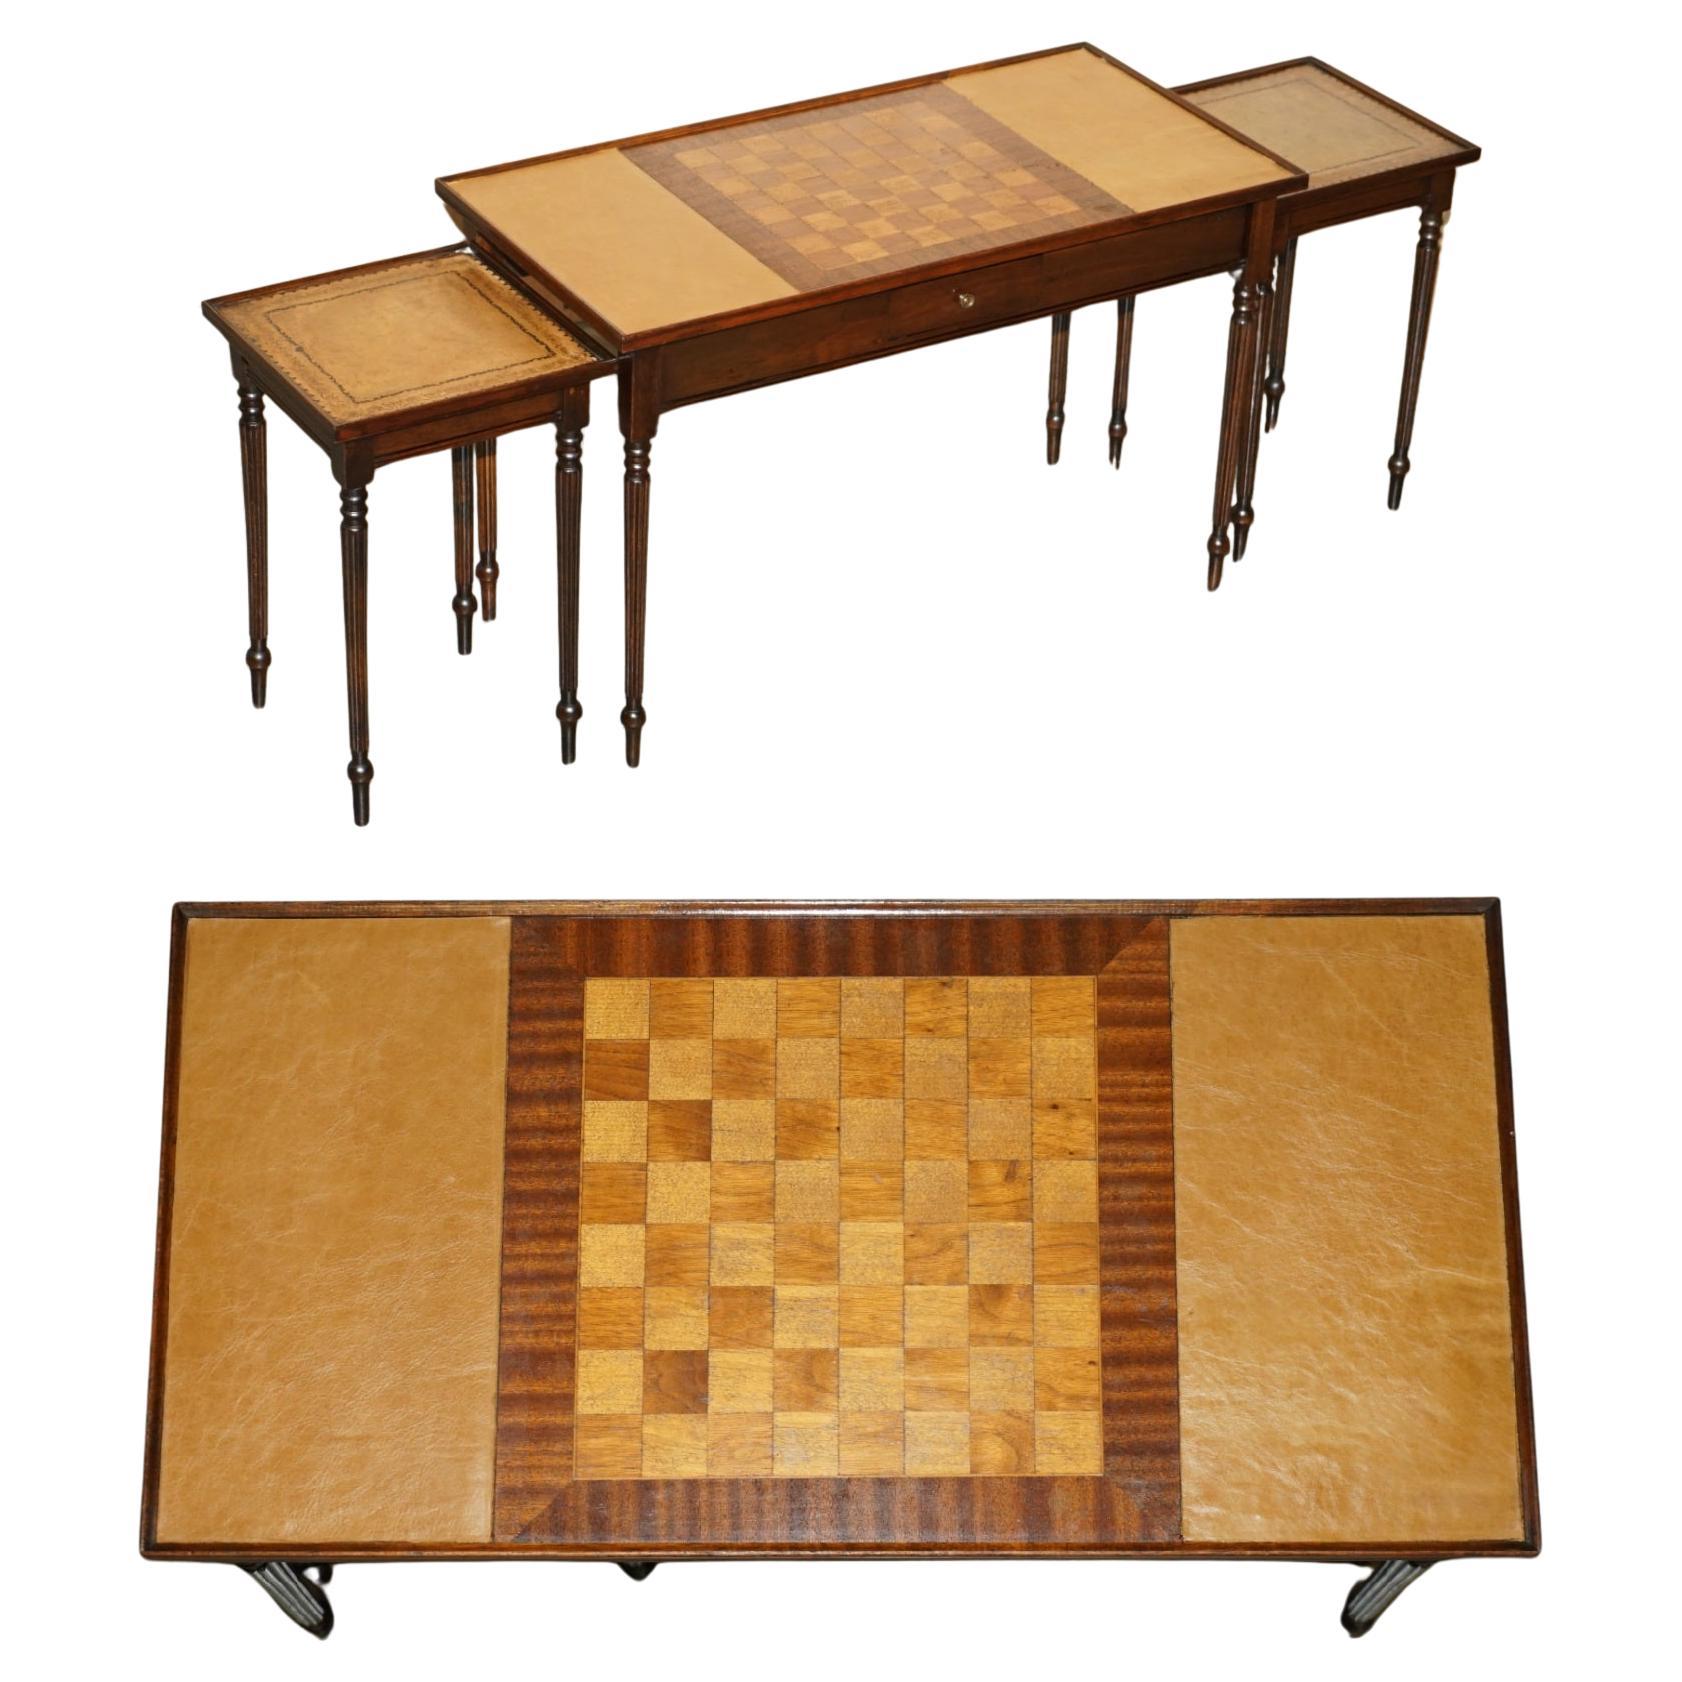 VINTAGE CIRCA 1950's LEATHER TOPPED CHESSBOARD COFFEE NEST OF TABLES FOR CHESS! For Sale